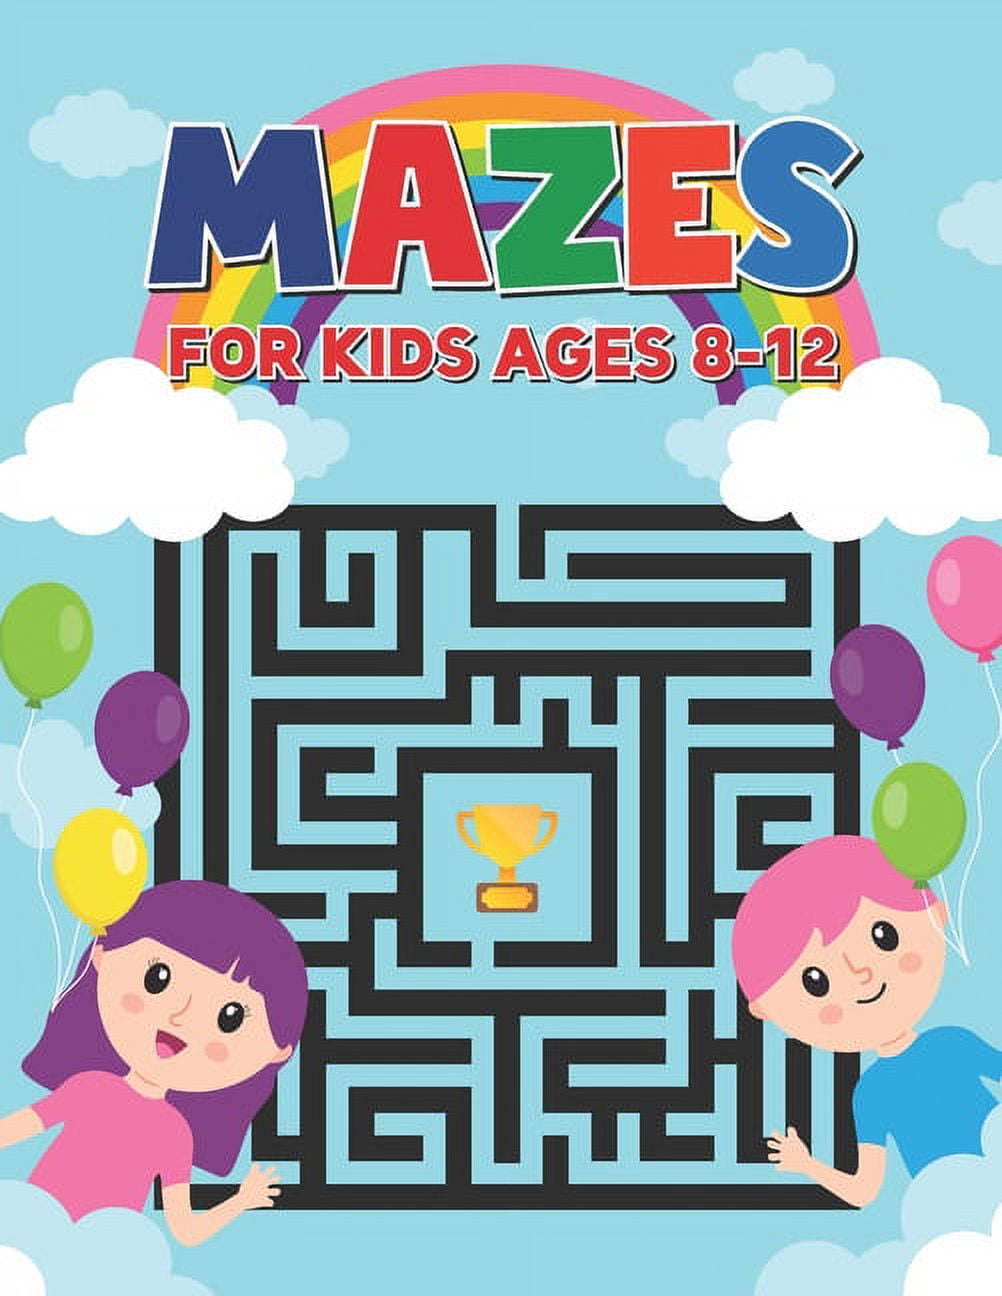 100 Fun Mazes of 5 Levels for Kids 4-6+8-12: Maze Puzzle Games